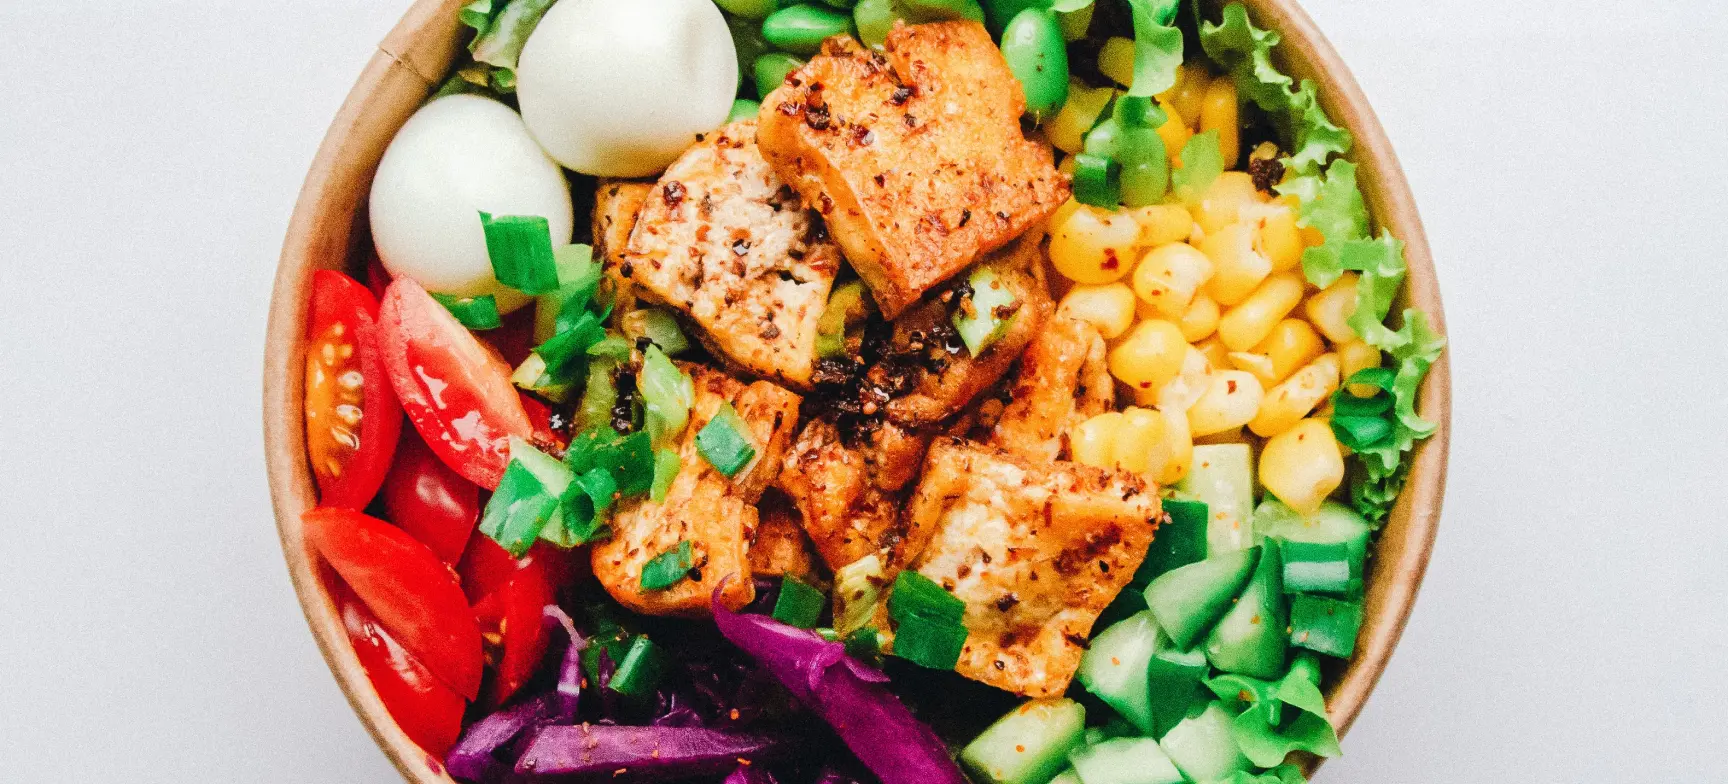 Colourfull pokebowl recipe with salmon, eggs, corn, cucomber, tomato and edamame beans